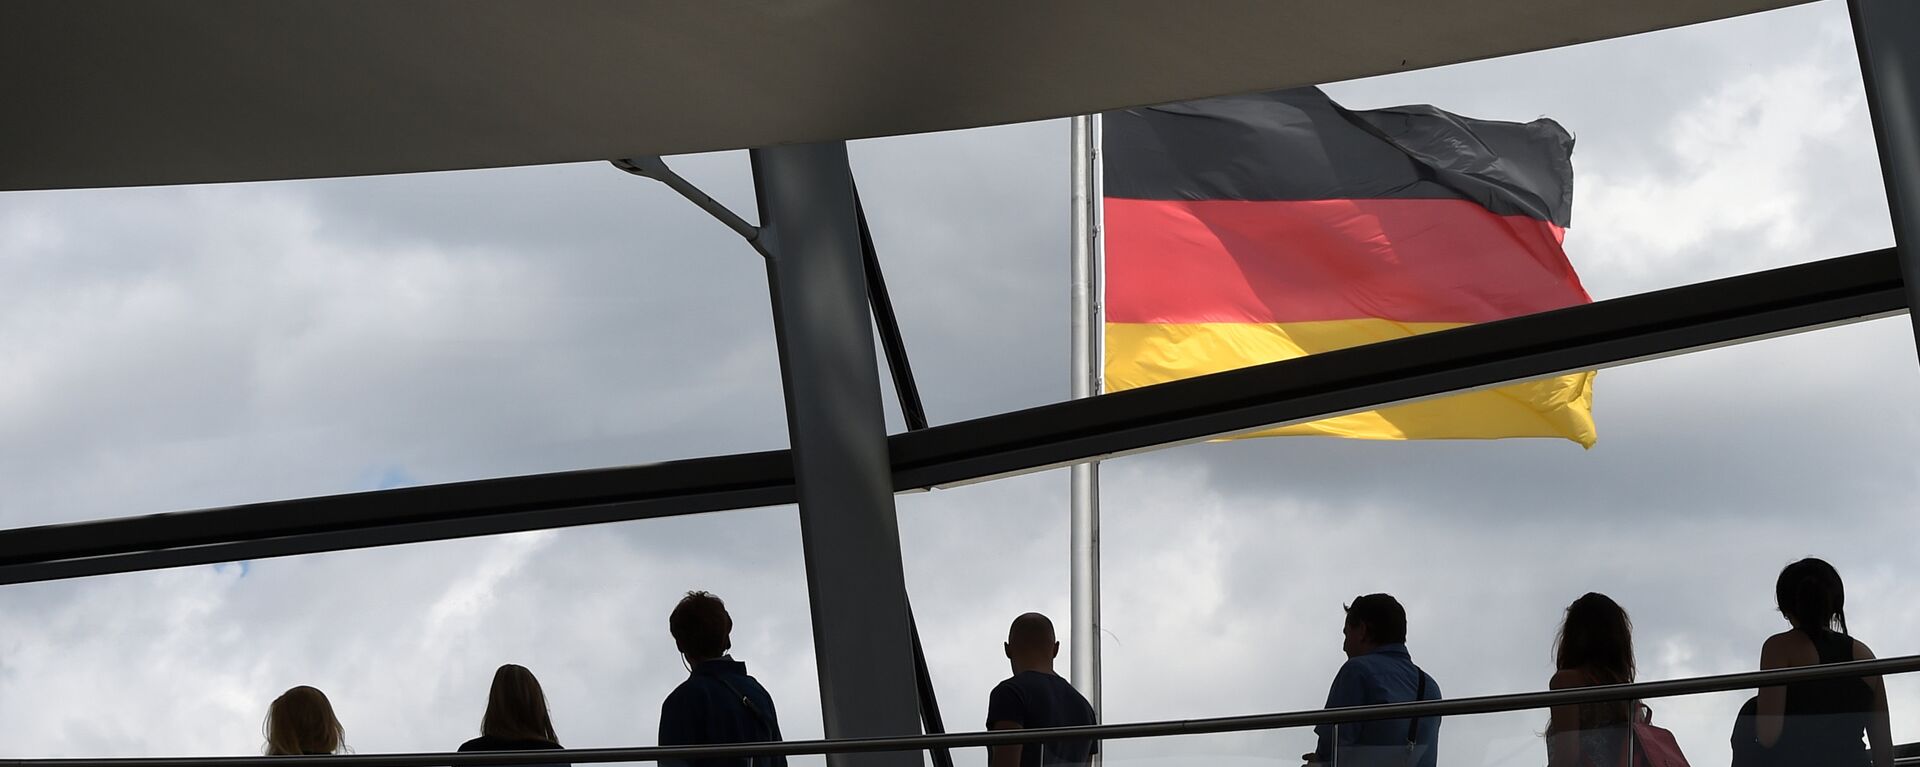 Visitors walk in the glass cupola of the Reichstag building that hosts the German parliament (Bundestag) and look at a German flag in Berlin, Germany, on June 10, 2016. - Sputnik Türkiye, 1920, 12.08.2022